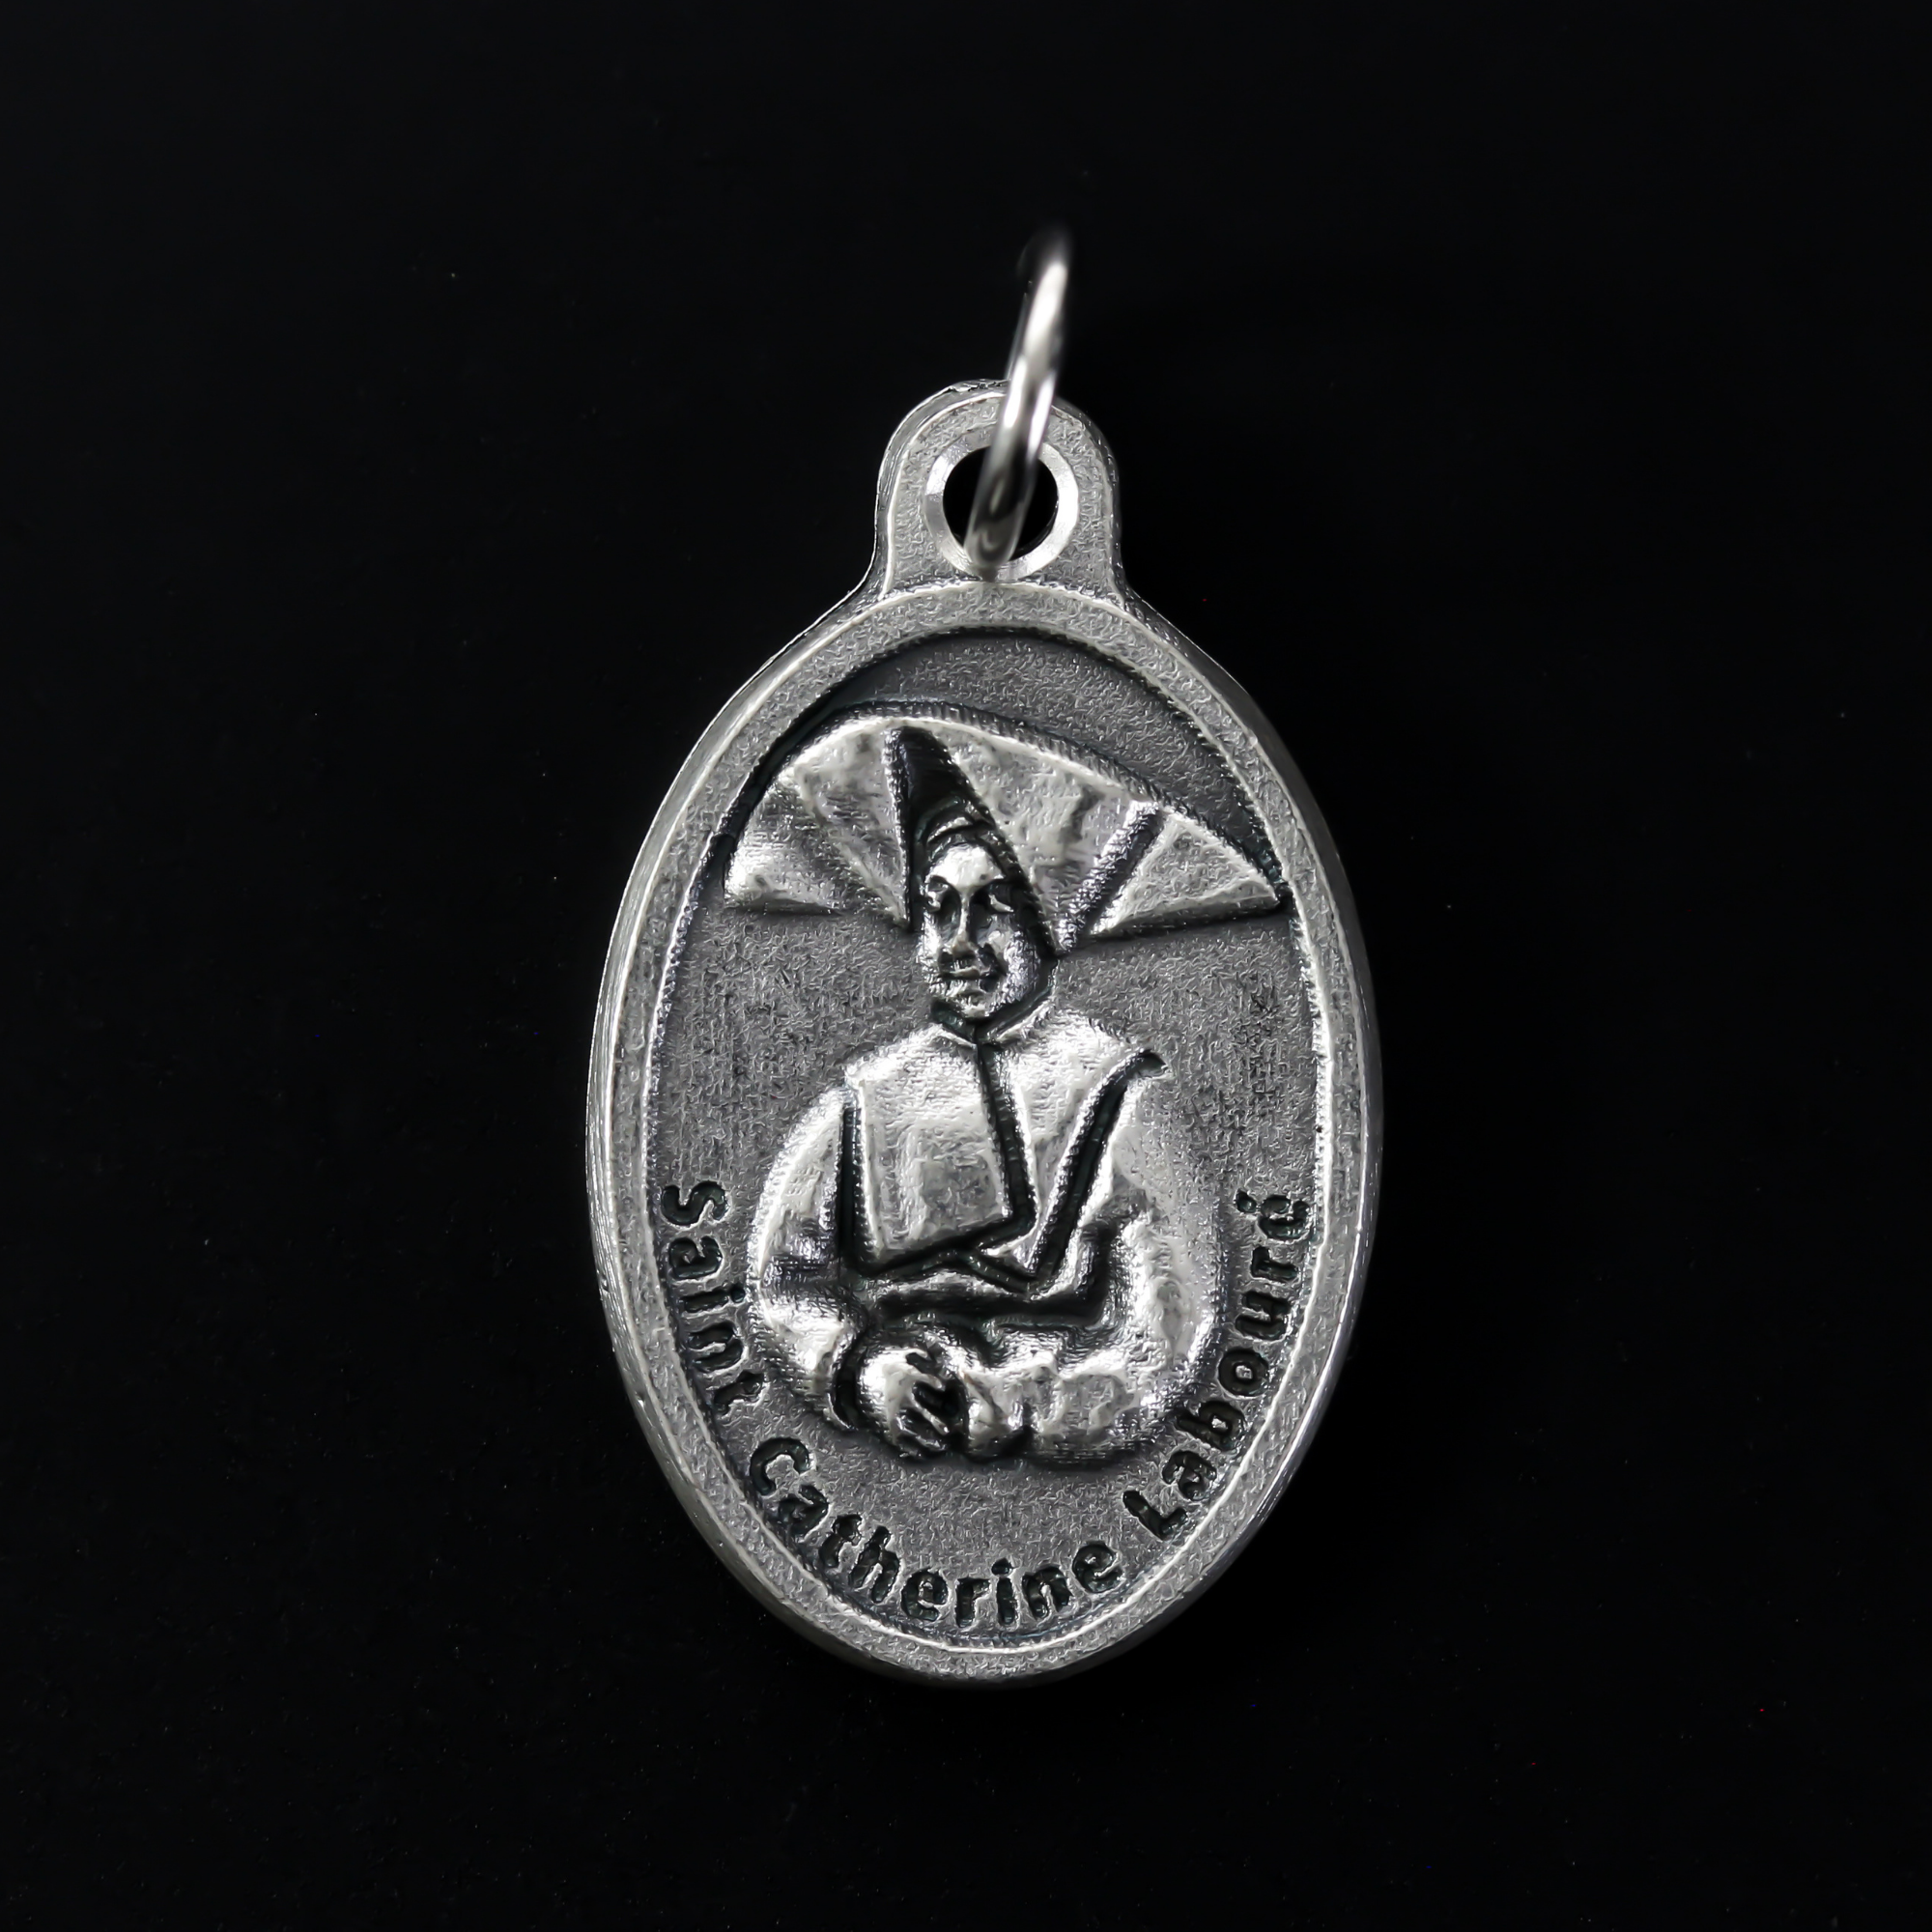 Saint Catherine Labouré medal that depicts the saint on the front and the reverse is marked "Pray For Us".